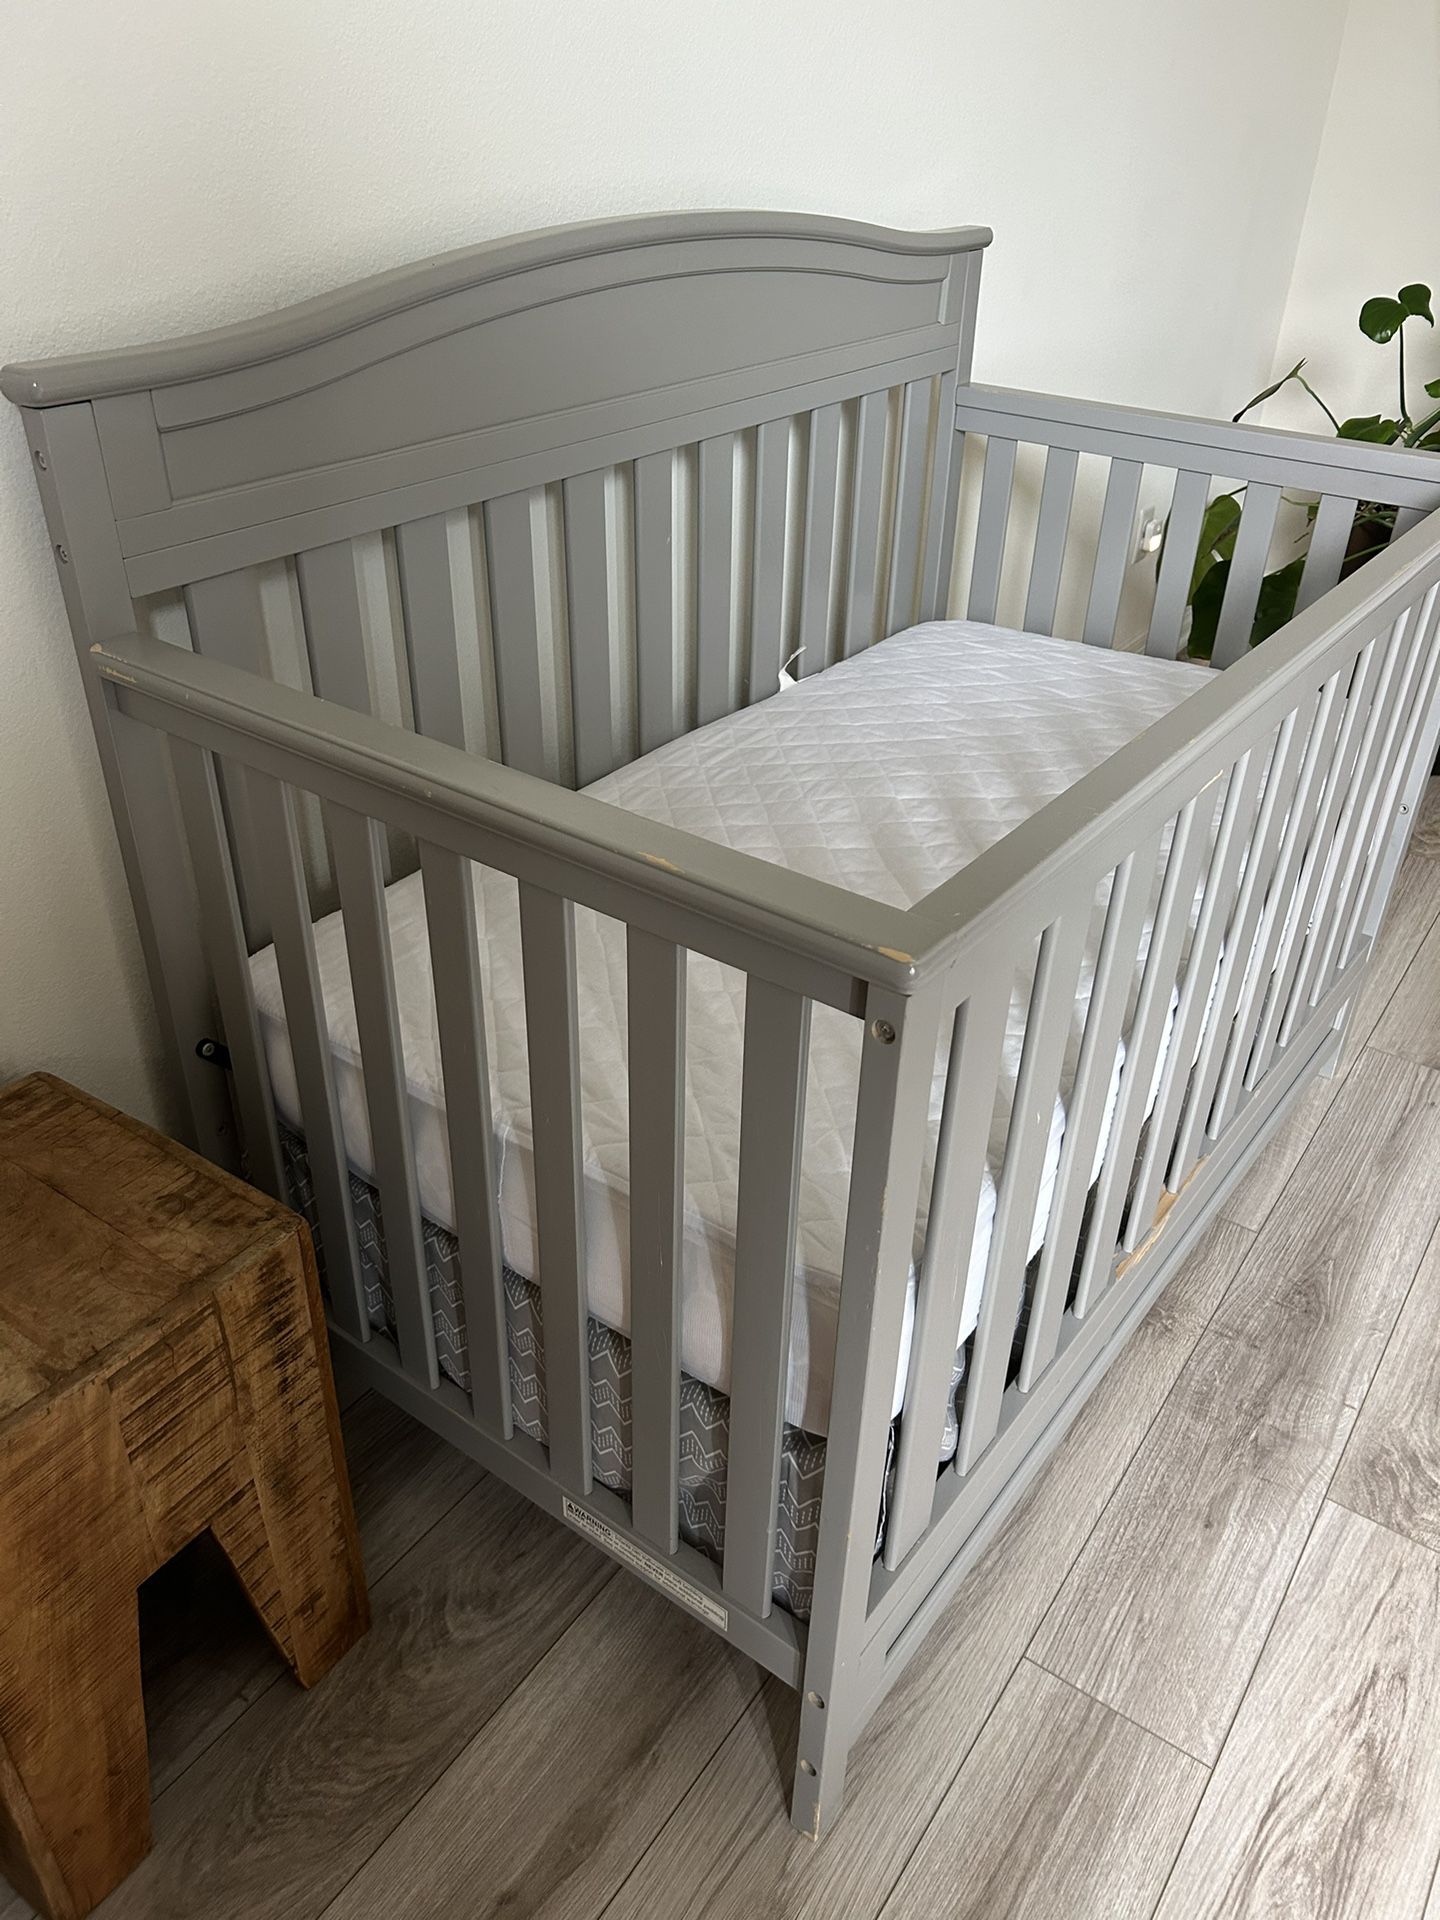 Delta Baby Crib with Simmons Beautyrest Mattress and Waterproof Protector